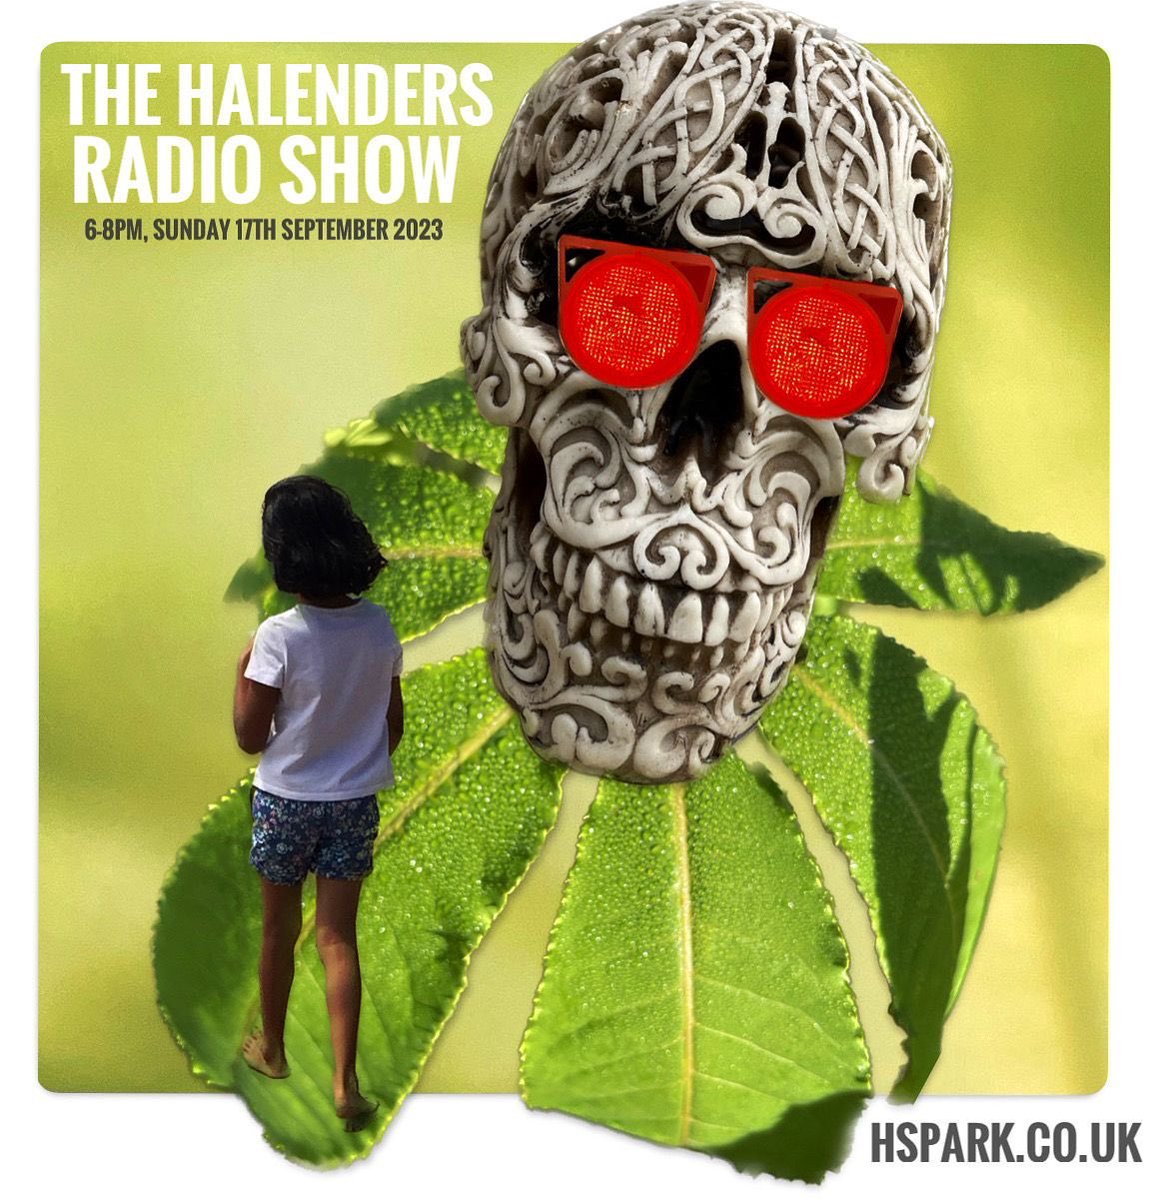 My live Halenders Show will chart the stages of a human life: love, birth, childhood, adulthood, ageing & of course death - via titles of songs by Adele, Black Sabbath, Patrick Hernandez, Deep Purple, Nirvana, Ian Dury, Midlake, Sugarfungus & many more. Join me from 6-8pm tonight